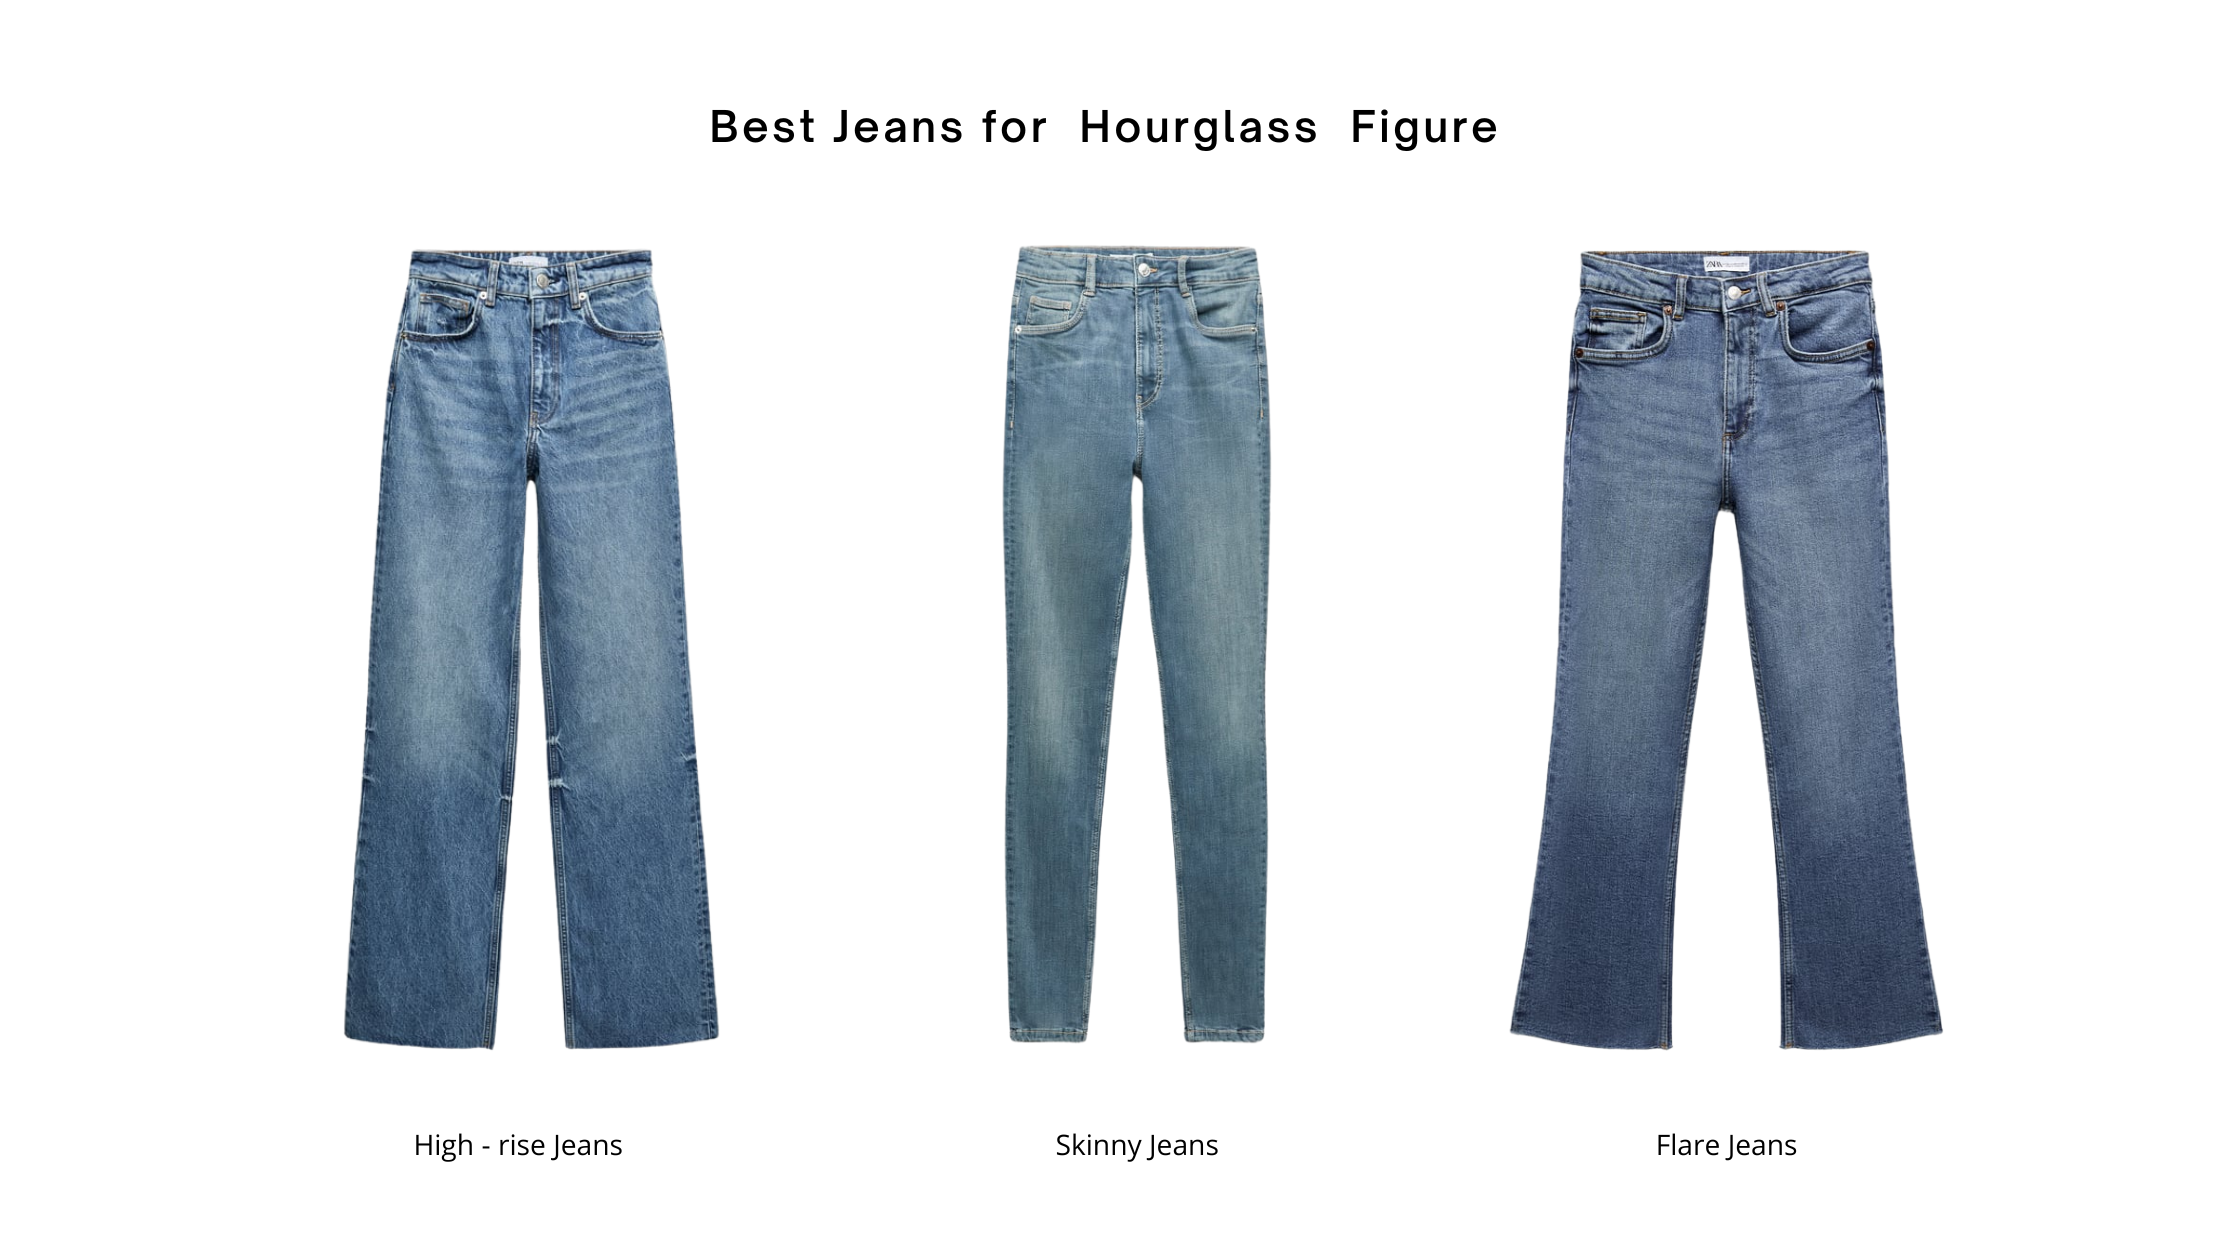 Best jeans for hourglass body shape